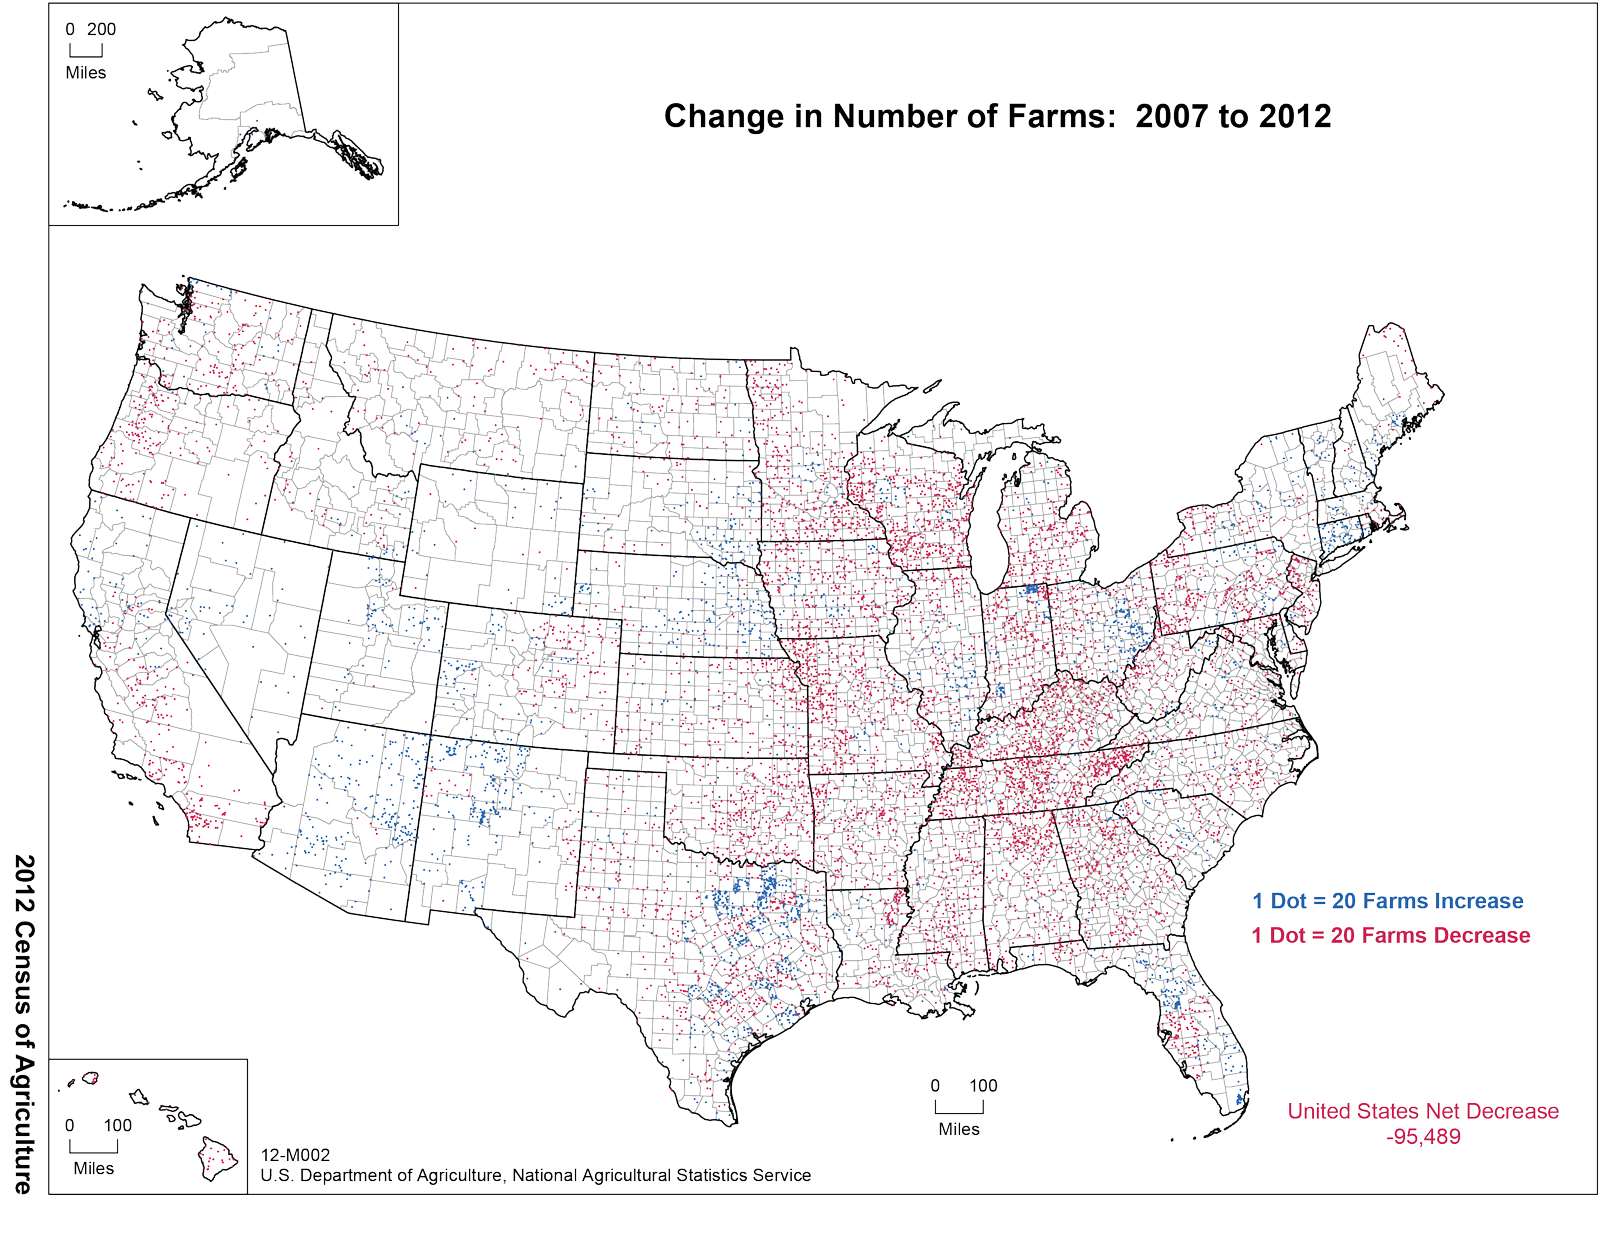 Change in the number of US farms from 2007 to 2012